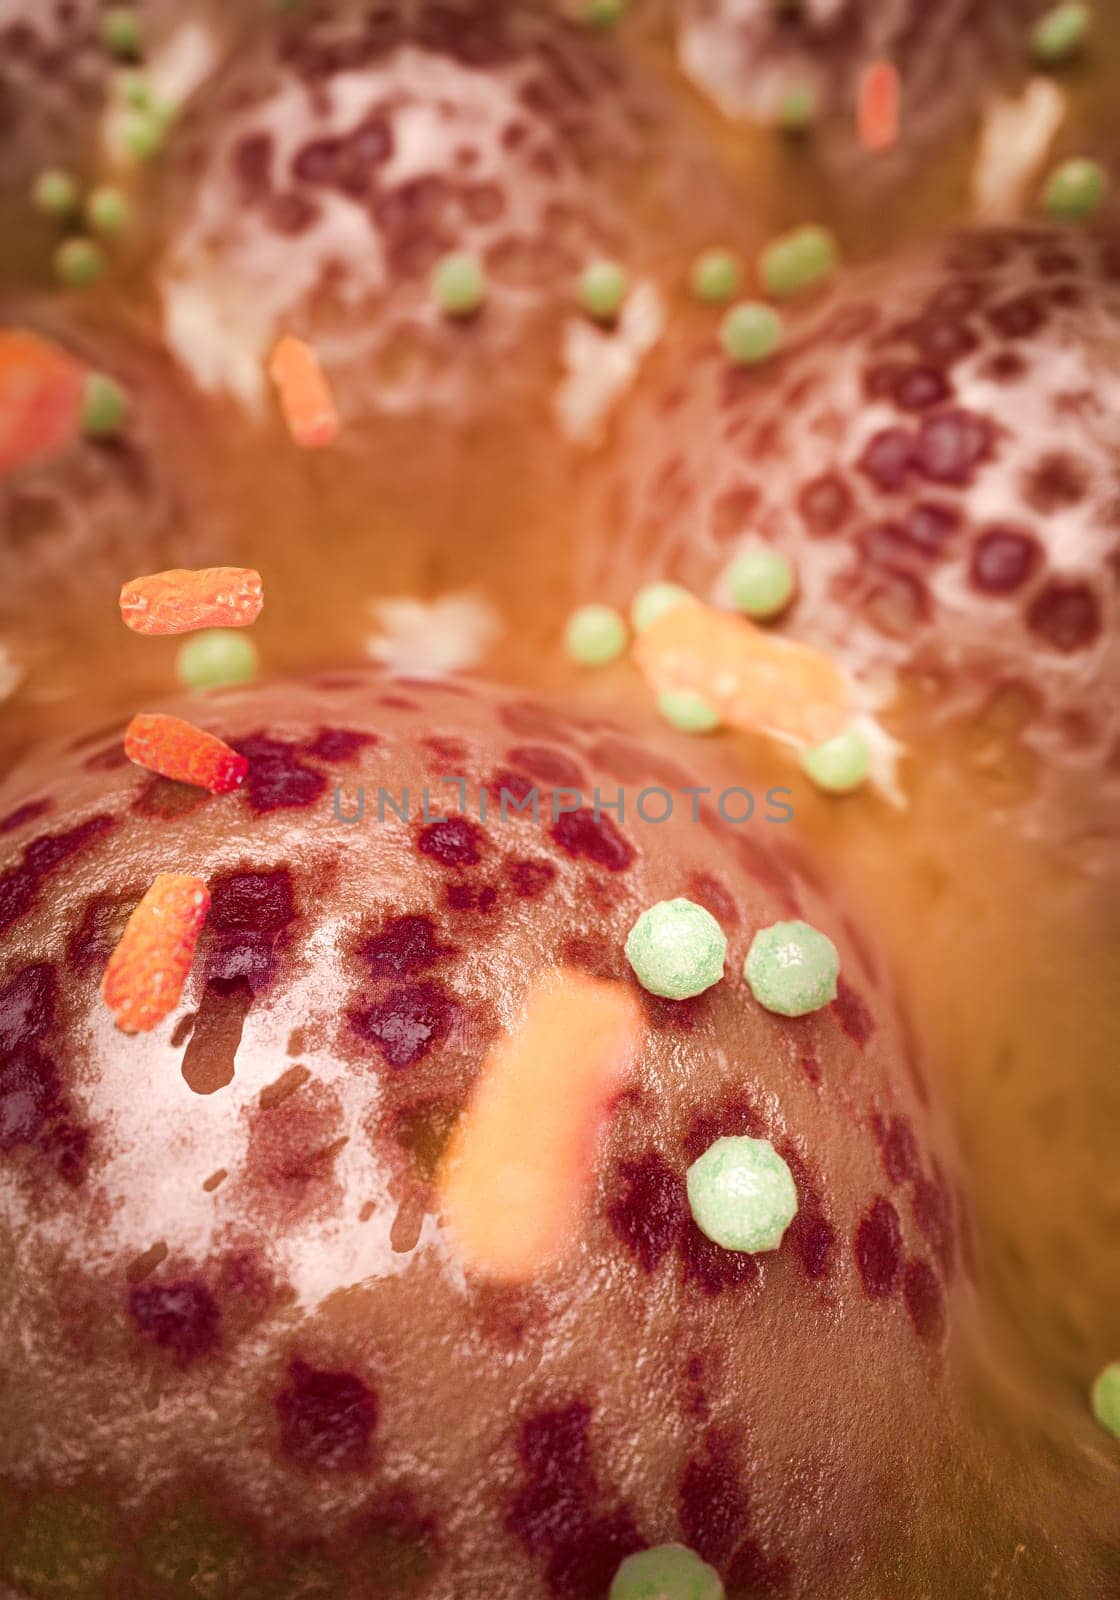 3D Rendering of Gut Flora Imbalance by Crevis